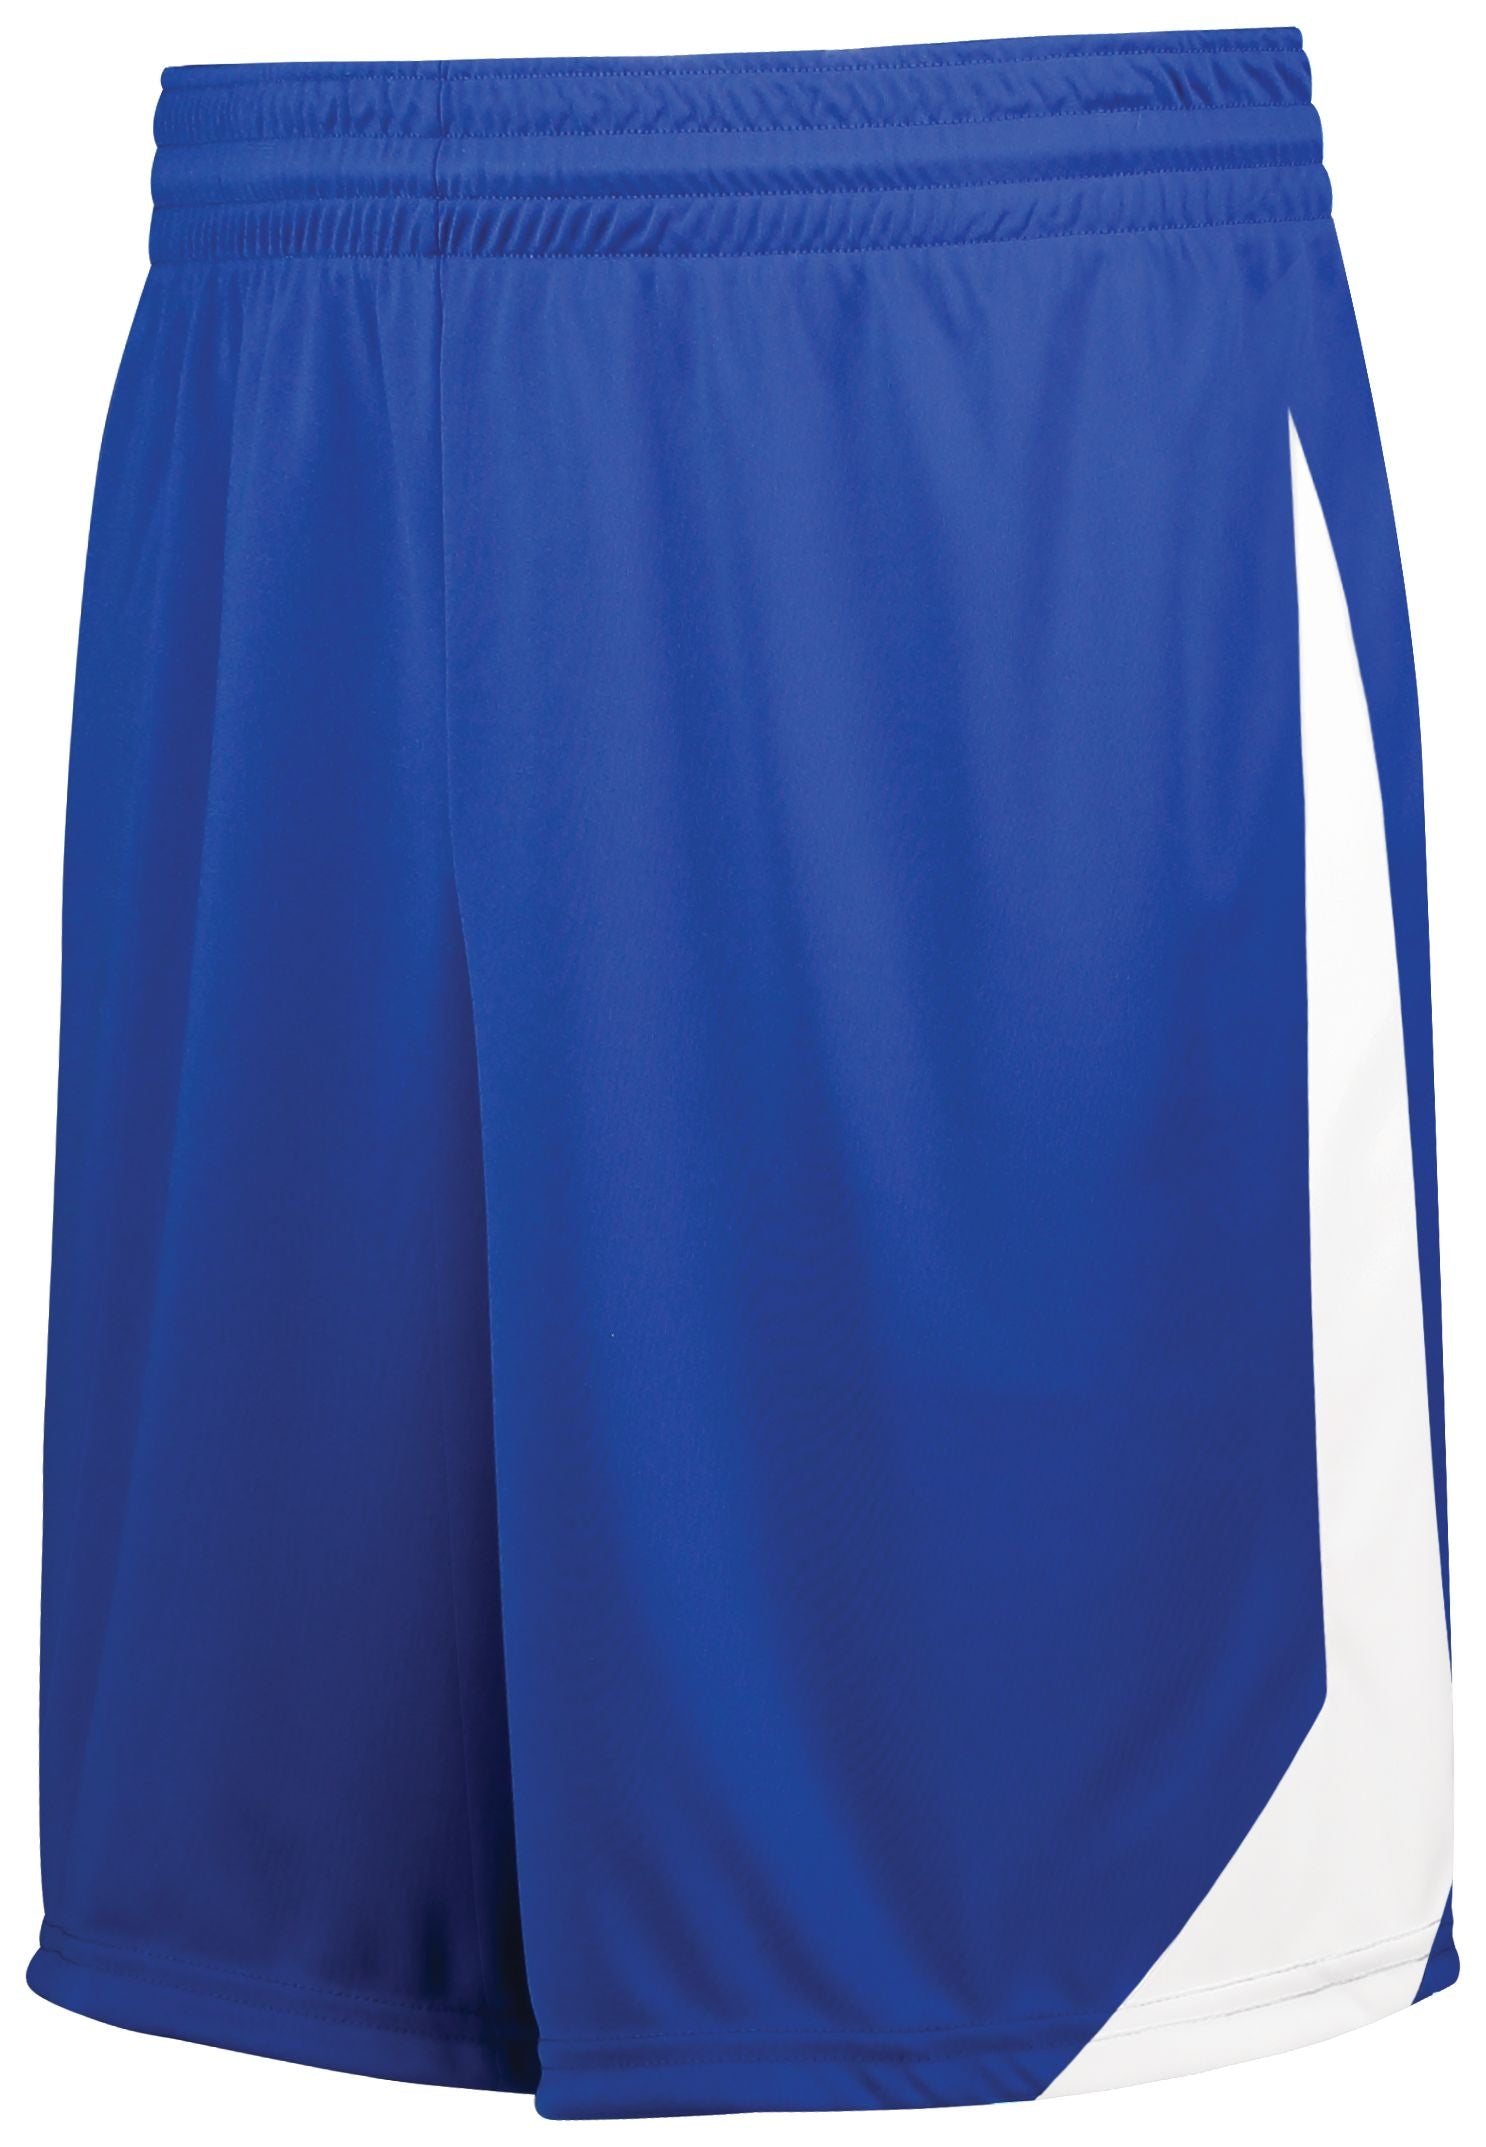 High 5 Youth Athletico Shorts in Royal/White  -Part of the Youth, Youth-Shorts, High5-Products, Soccer, All-Sports-1 product lines at KanaleyCreations.com